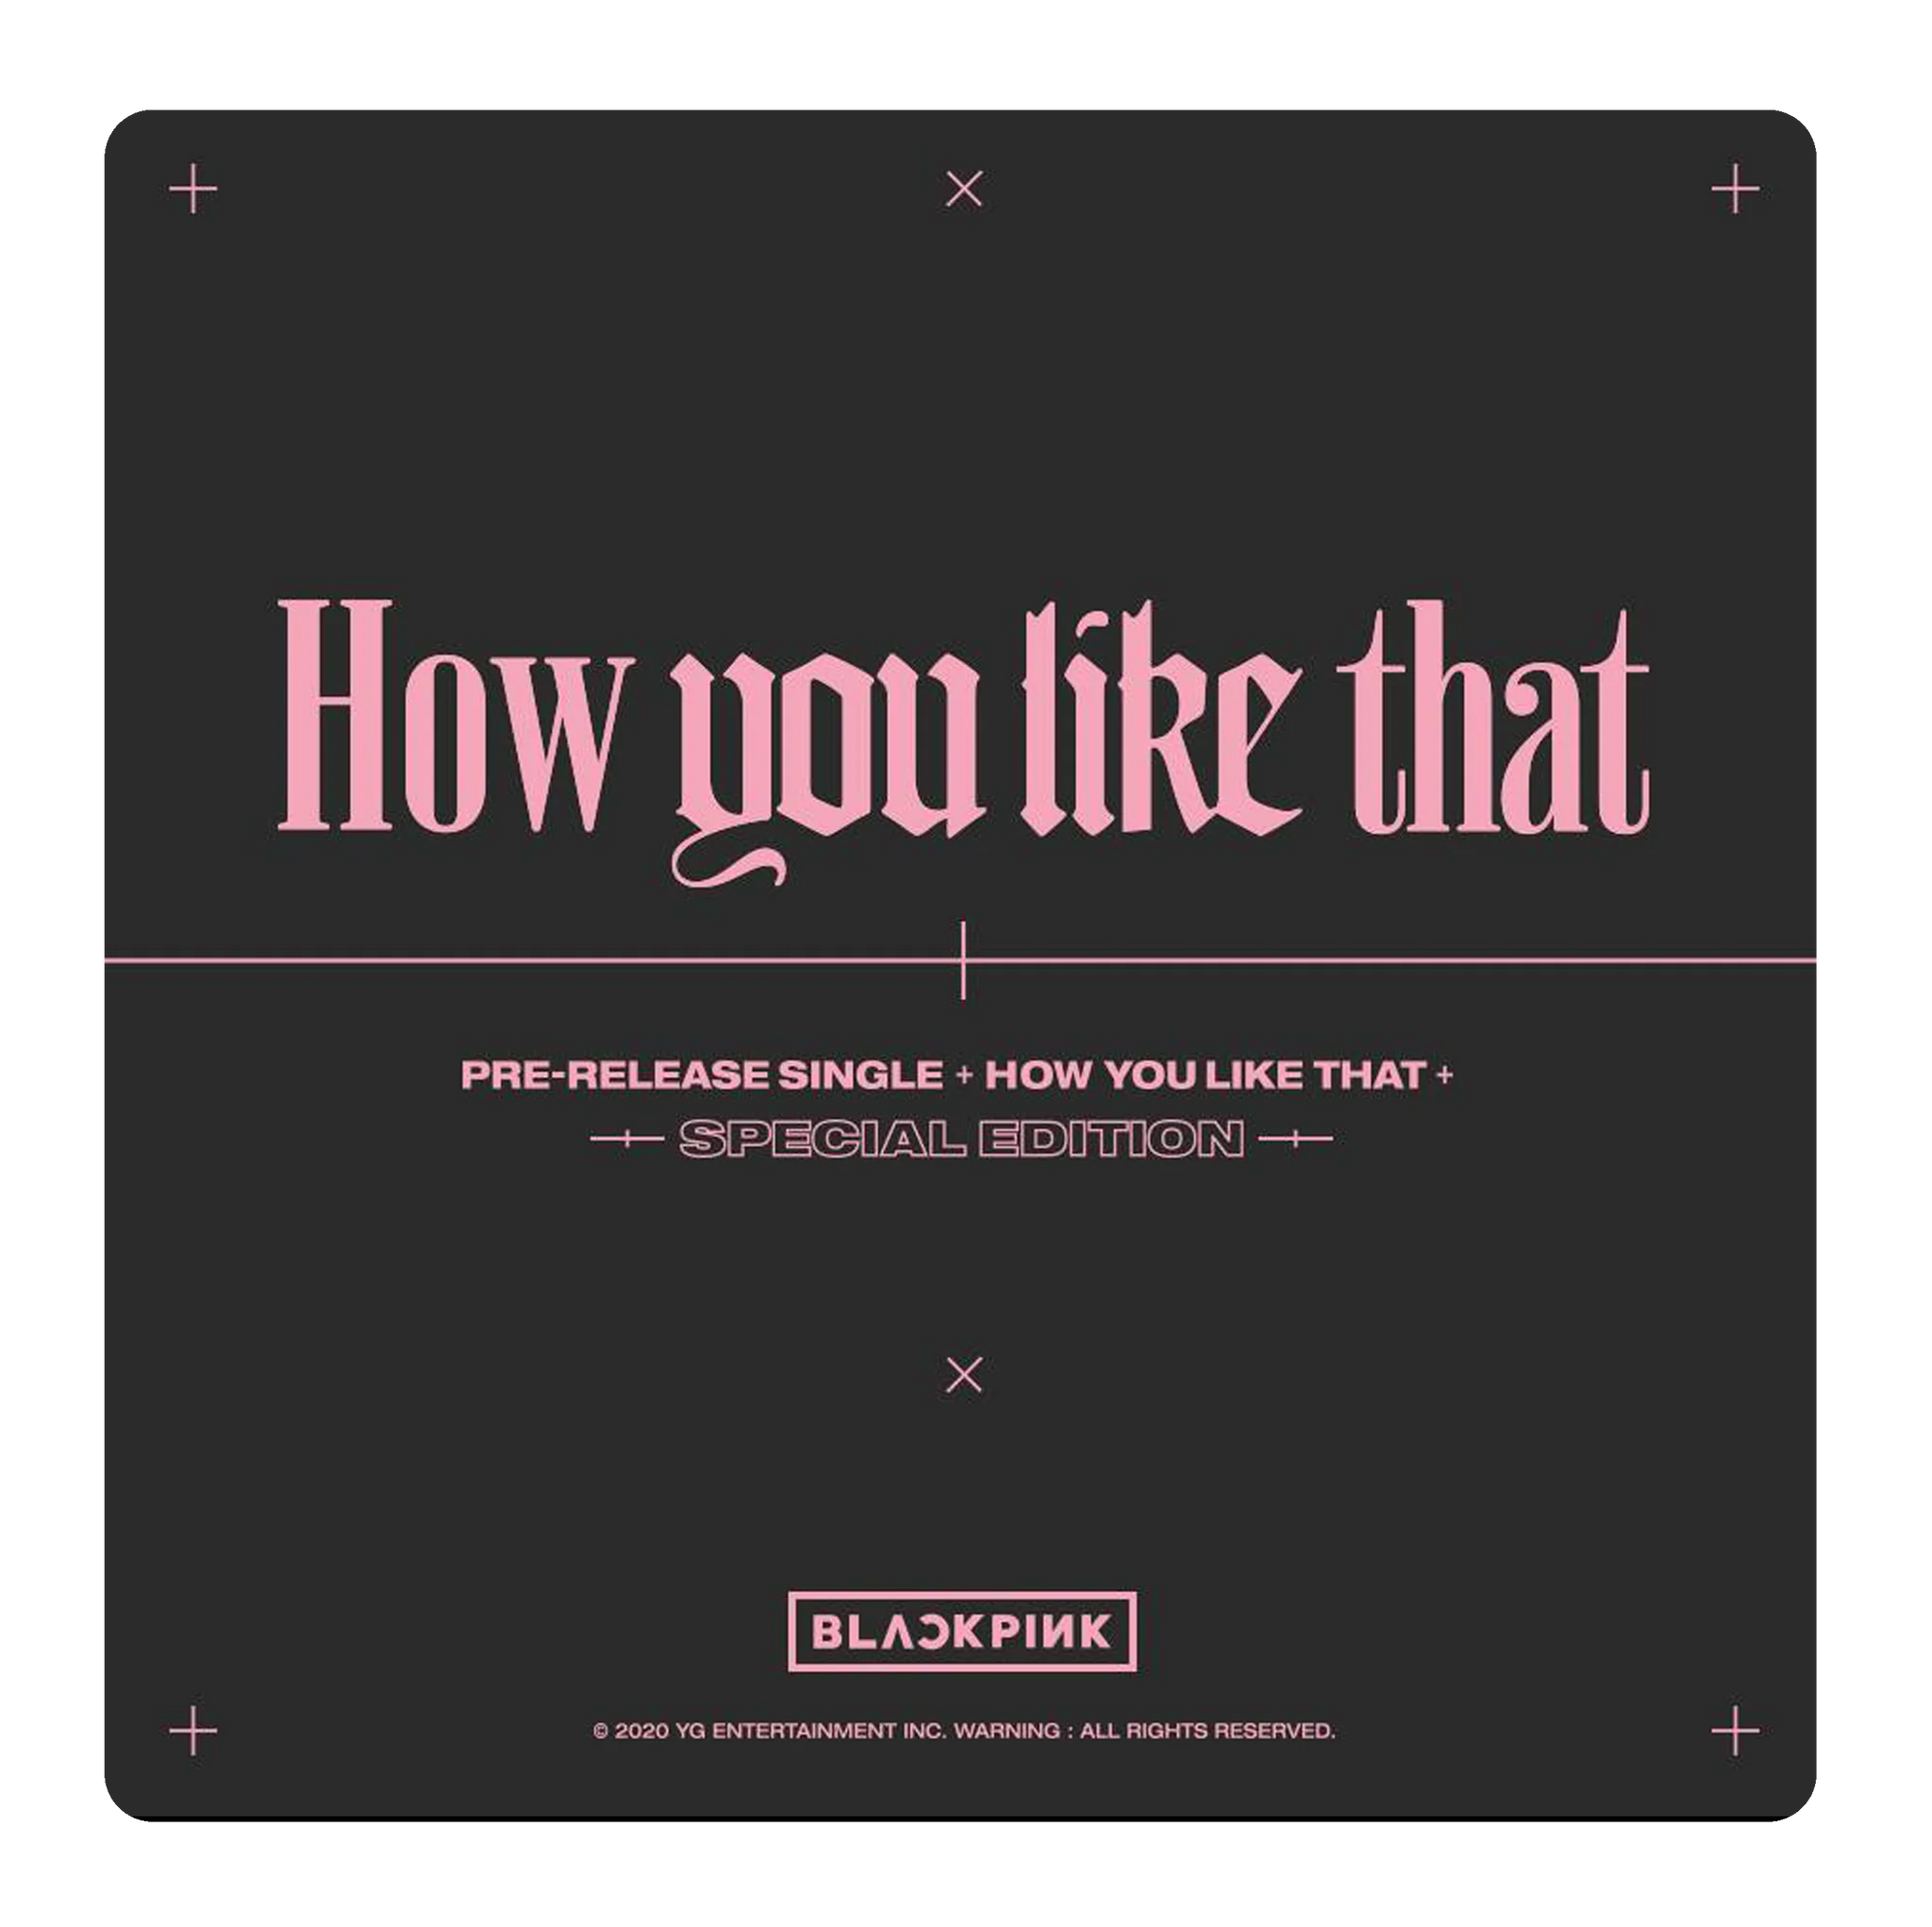 BLACKPINK - How You Like That (SPECIAL EDITION)